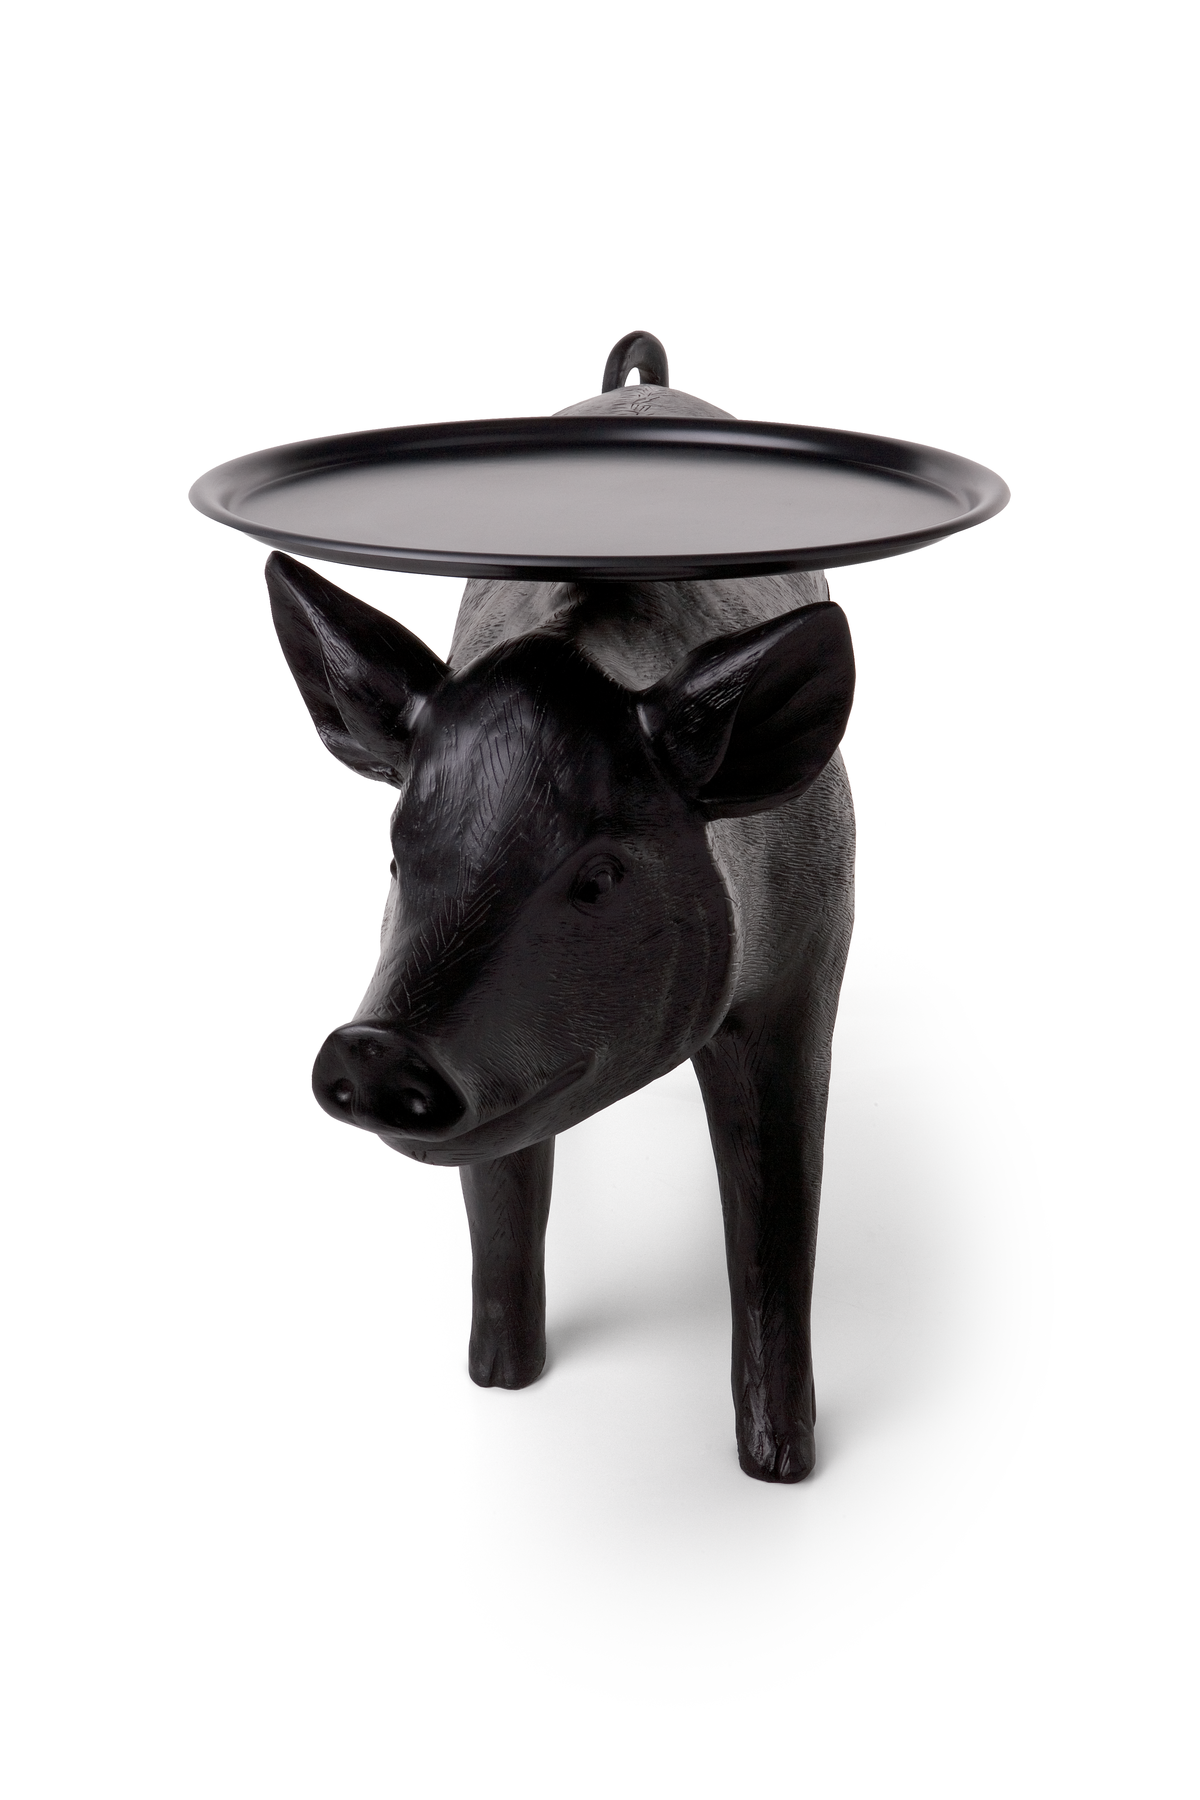 pig table front view 